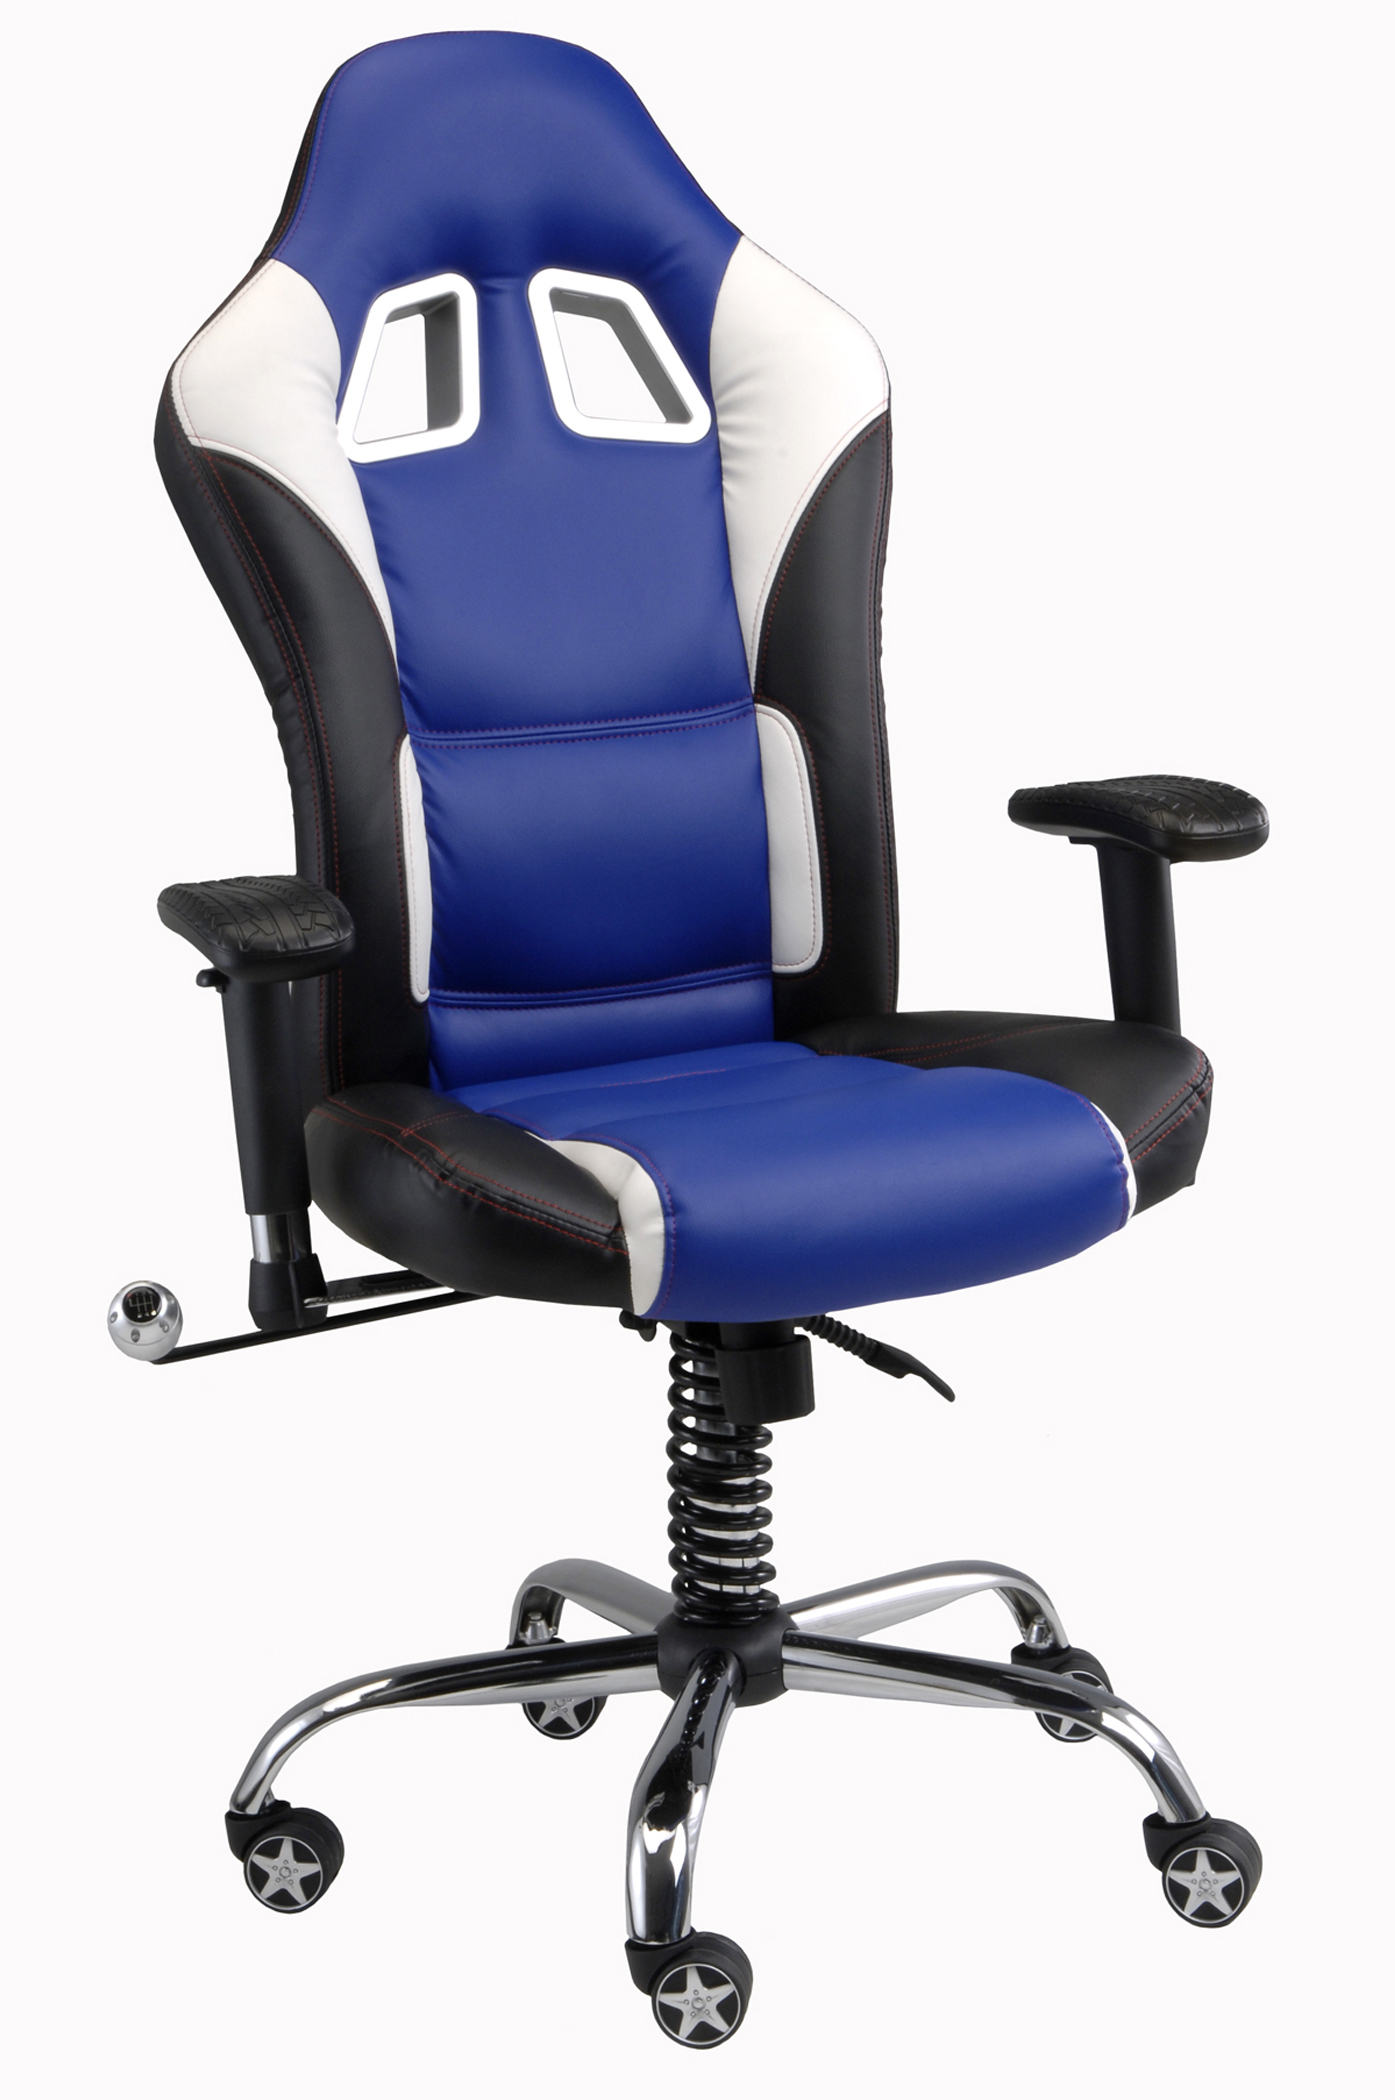 Intro-Tech Automotive, Pitstop Furniture, IN1100N SE Chair Navy, Desk Chair